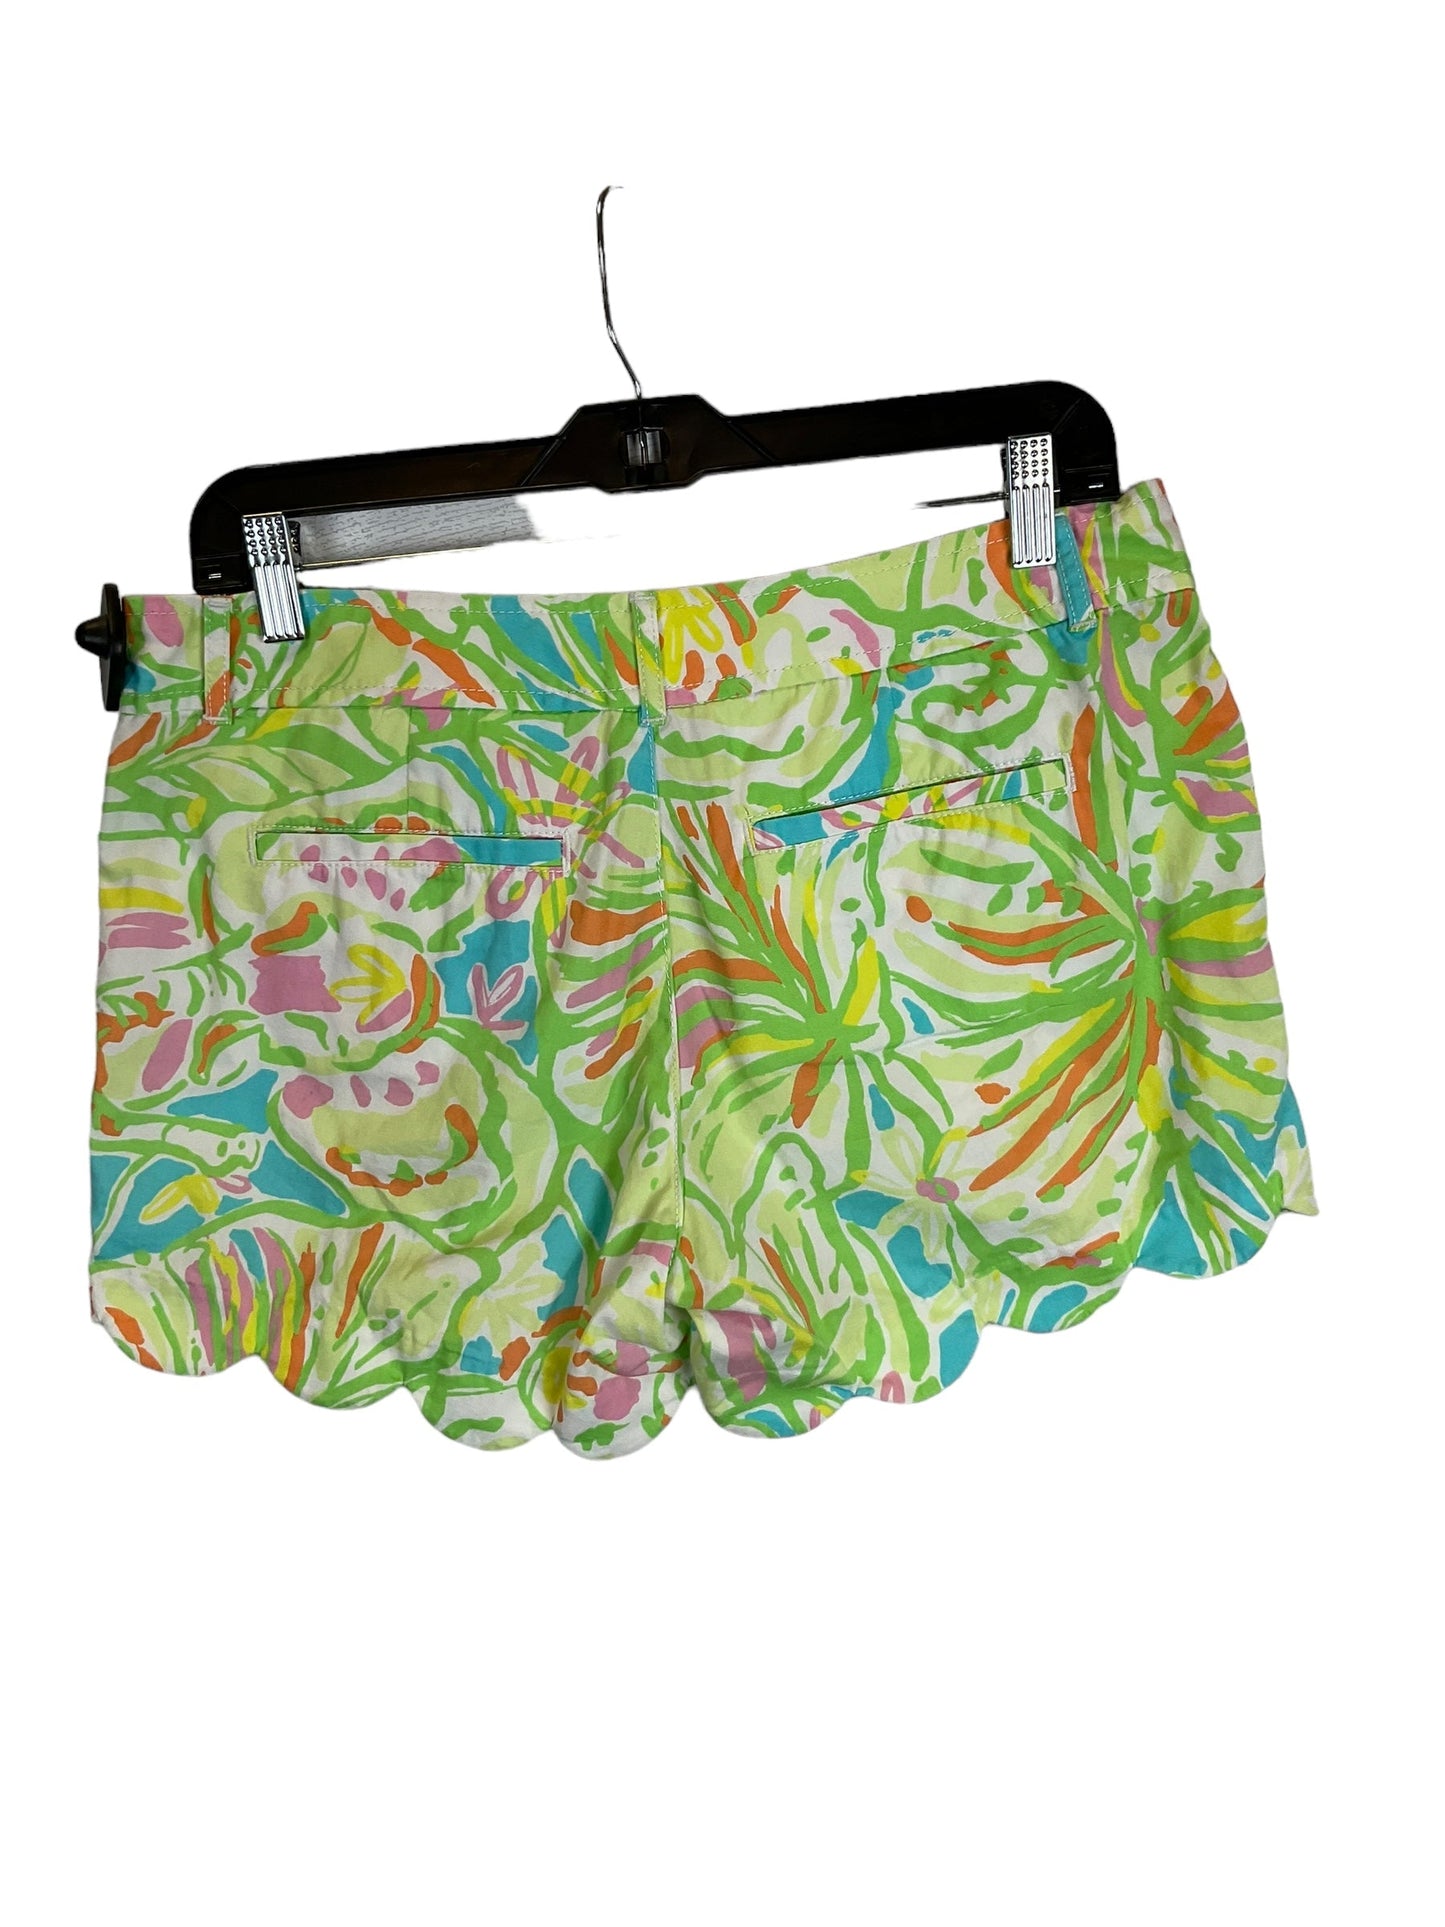 Multi-colored Shorts Designer Lilly Pulitzer, Size 6